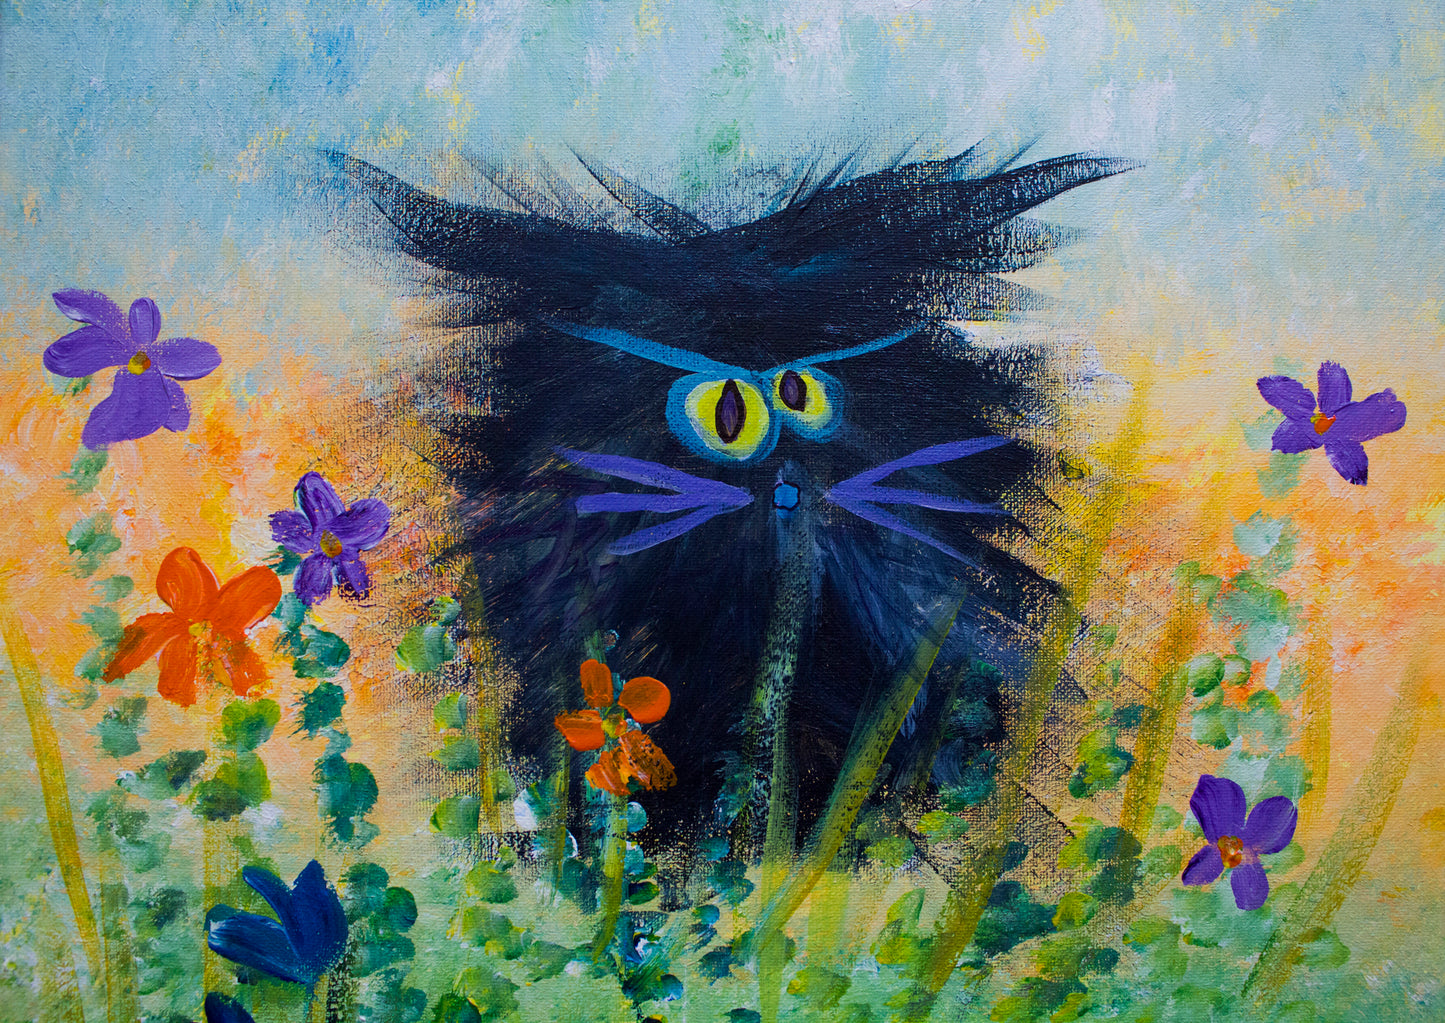 Black Cranky Cat with Purple Whiskers - Matted Print